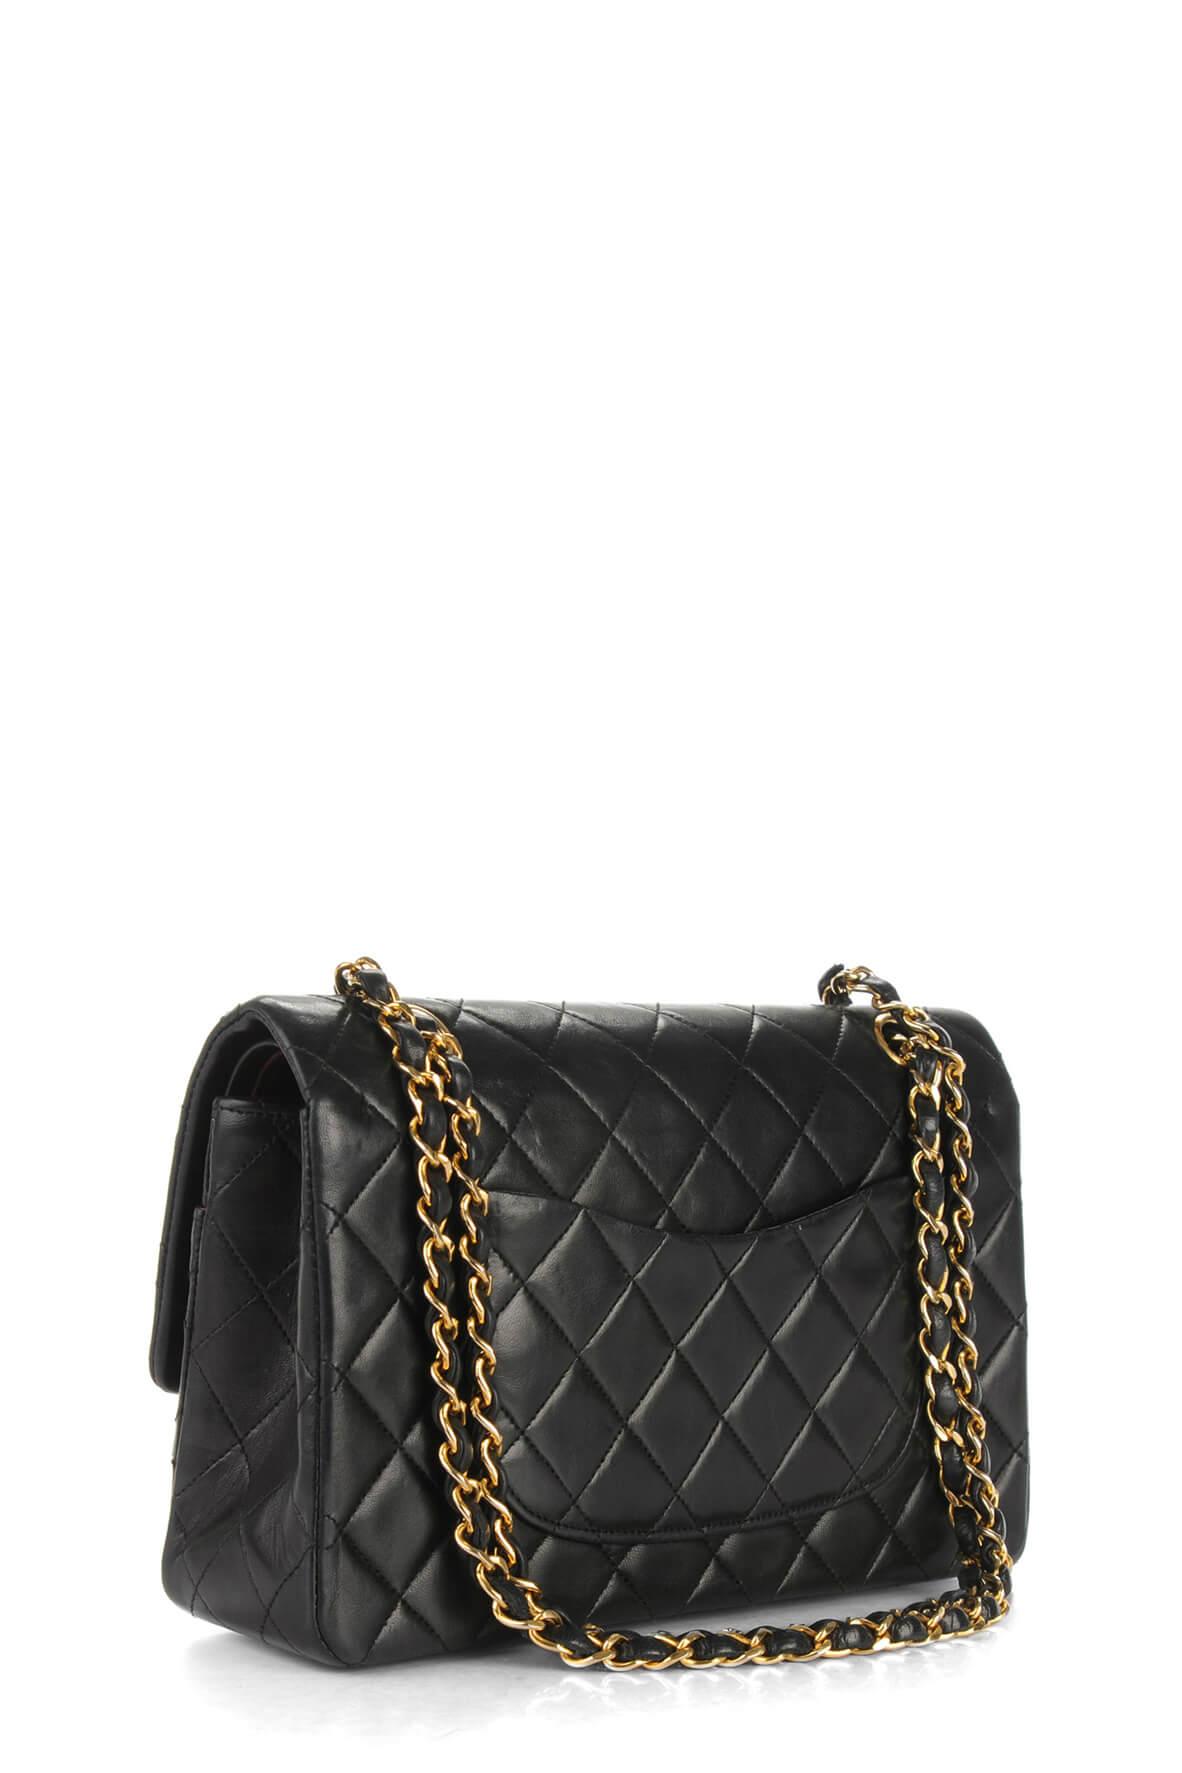 Grand Shopping Tote Black with Gold Hardware – Style Theory SG